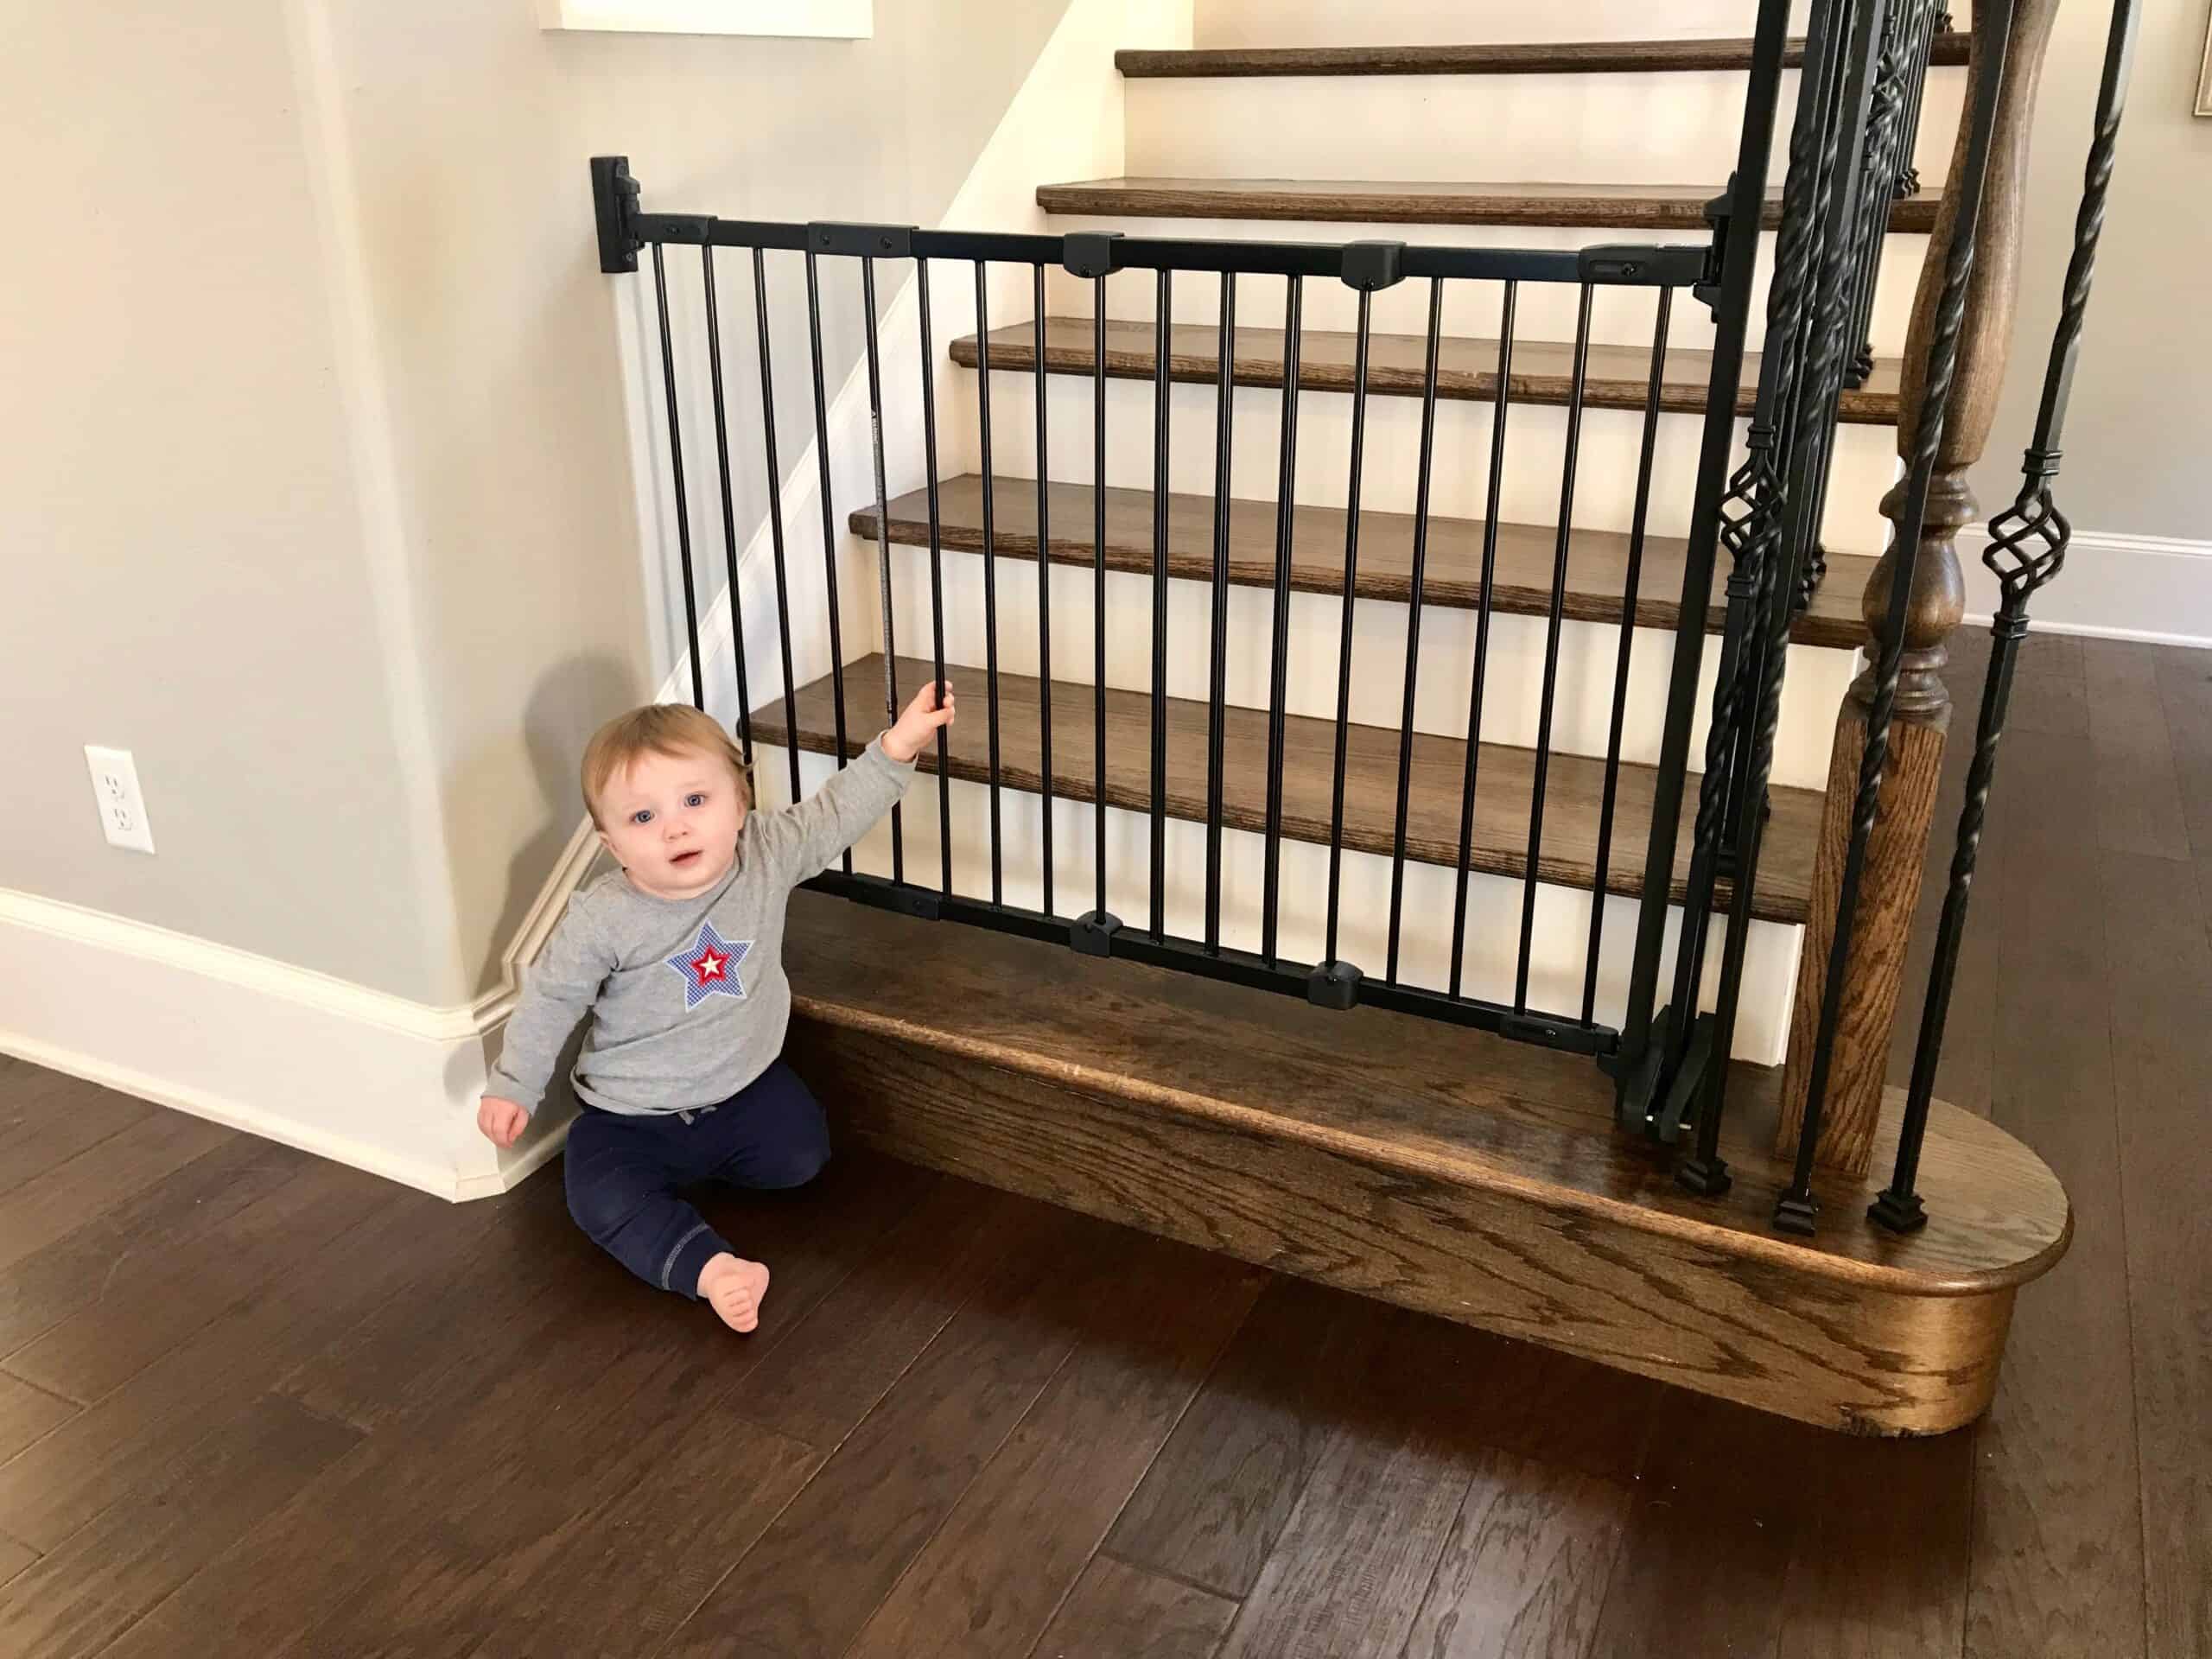 Blog - Infant House Childproofing/Baby Proofing